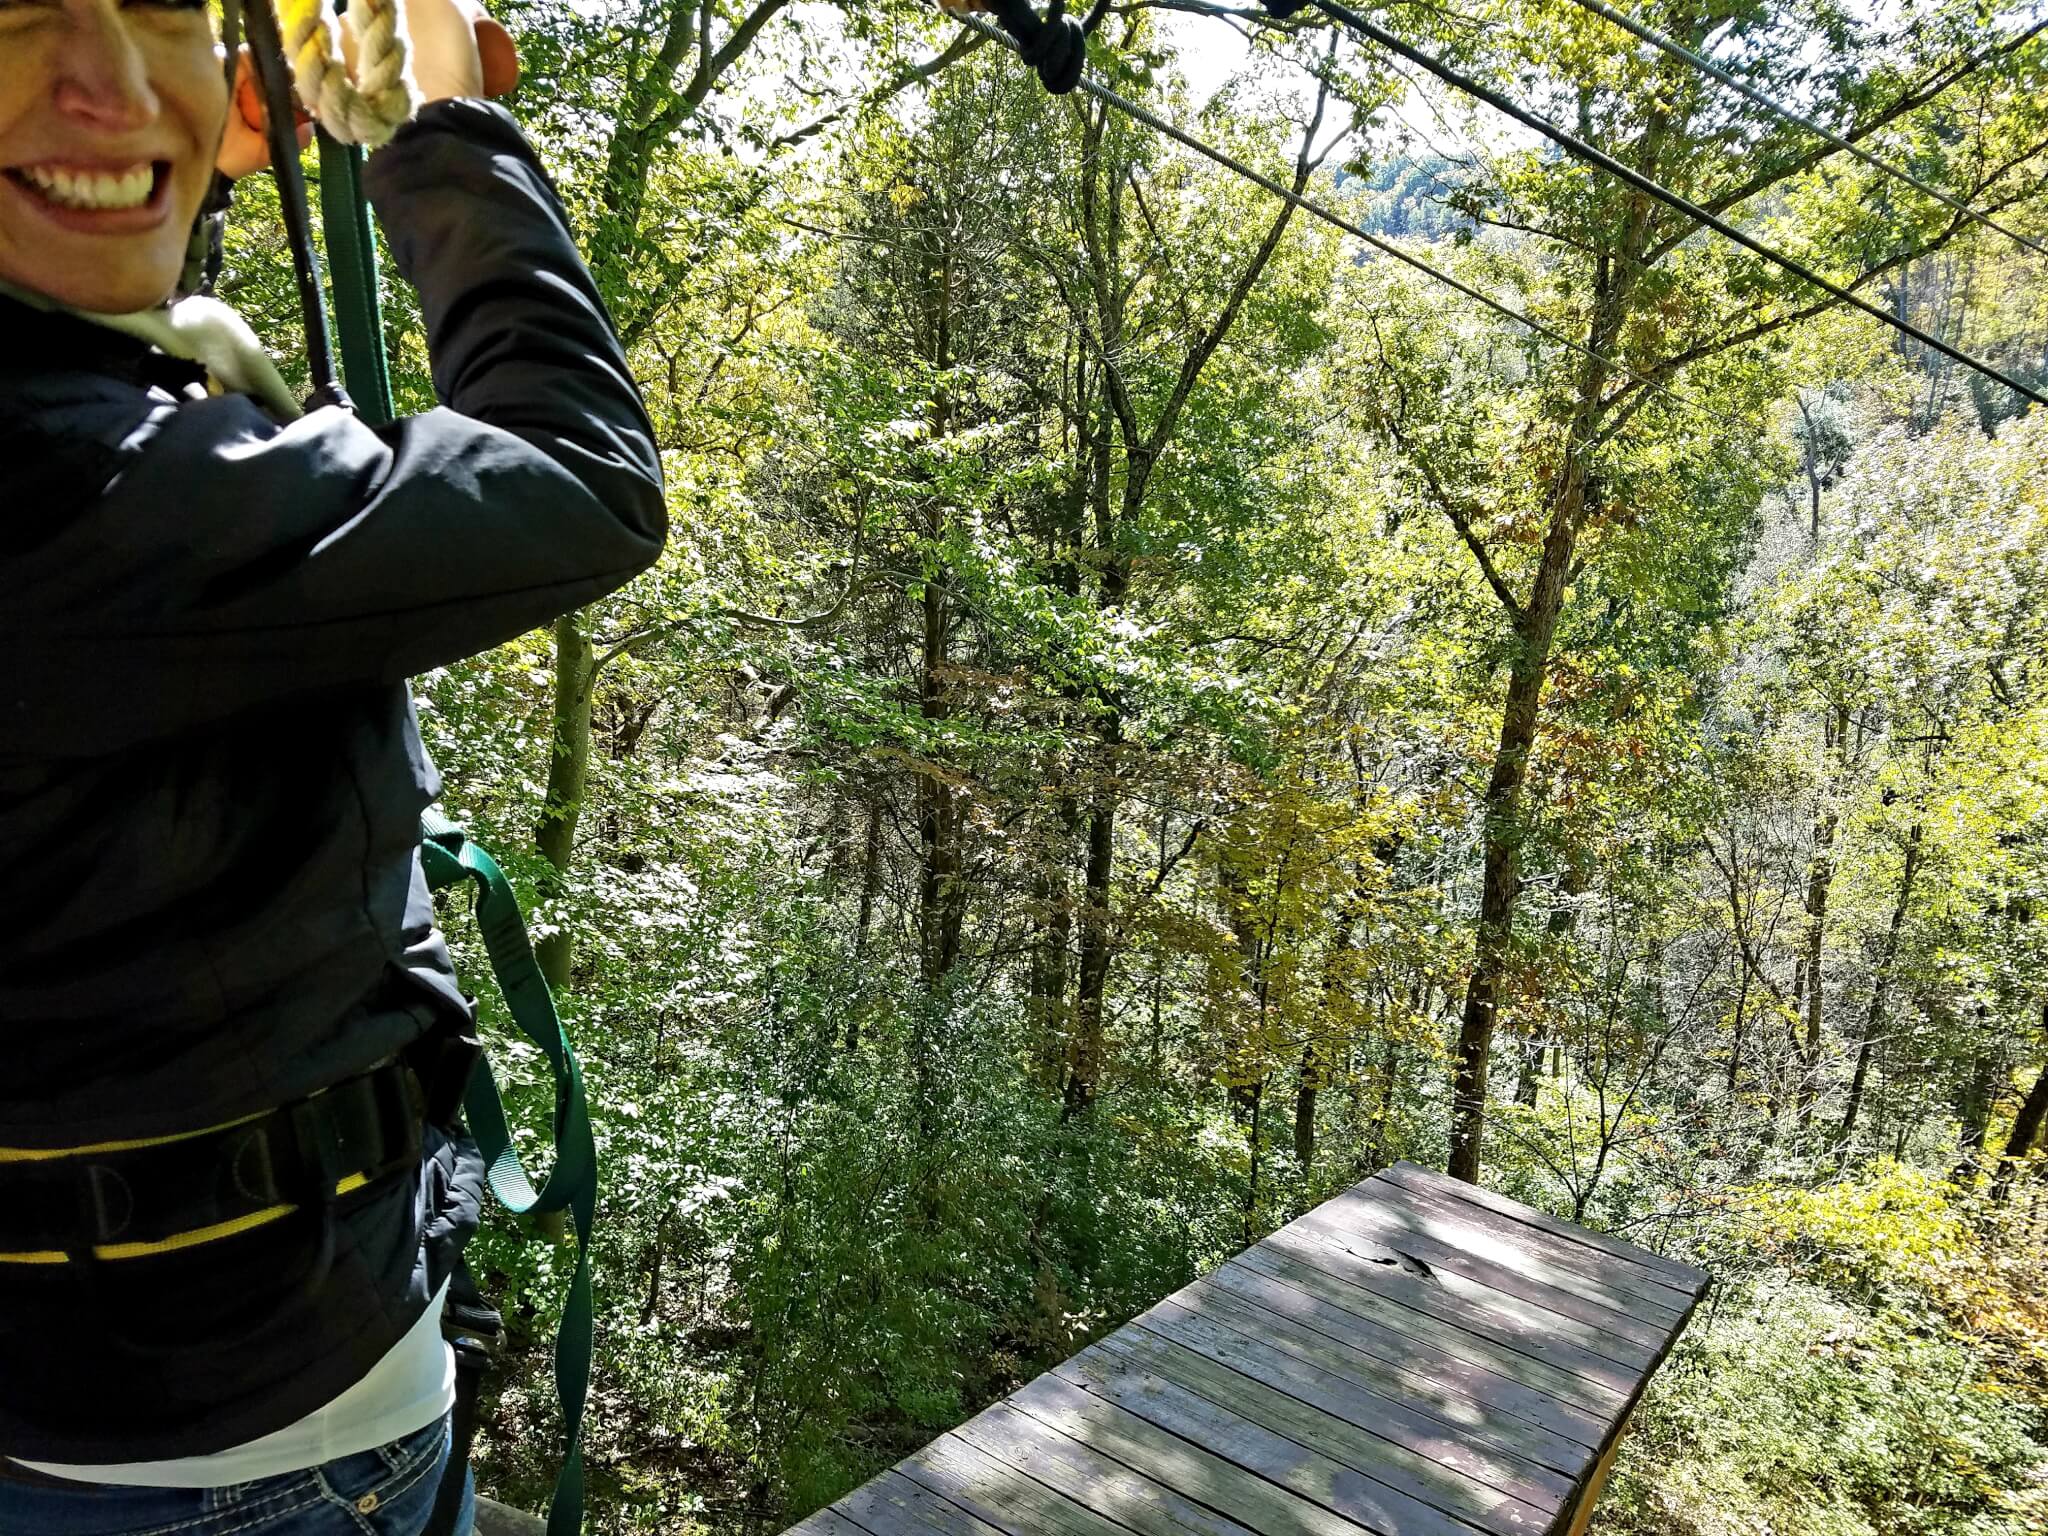 20. Ziplining: missing the rope, waiting for help and facing the gorge